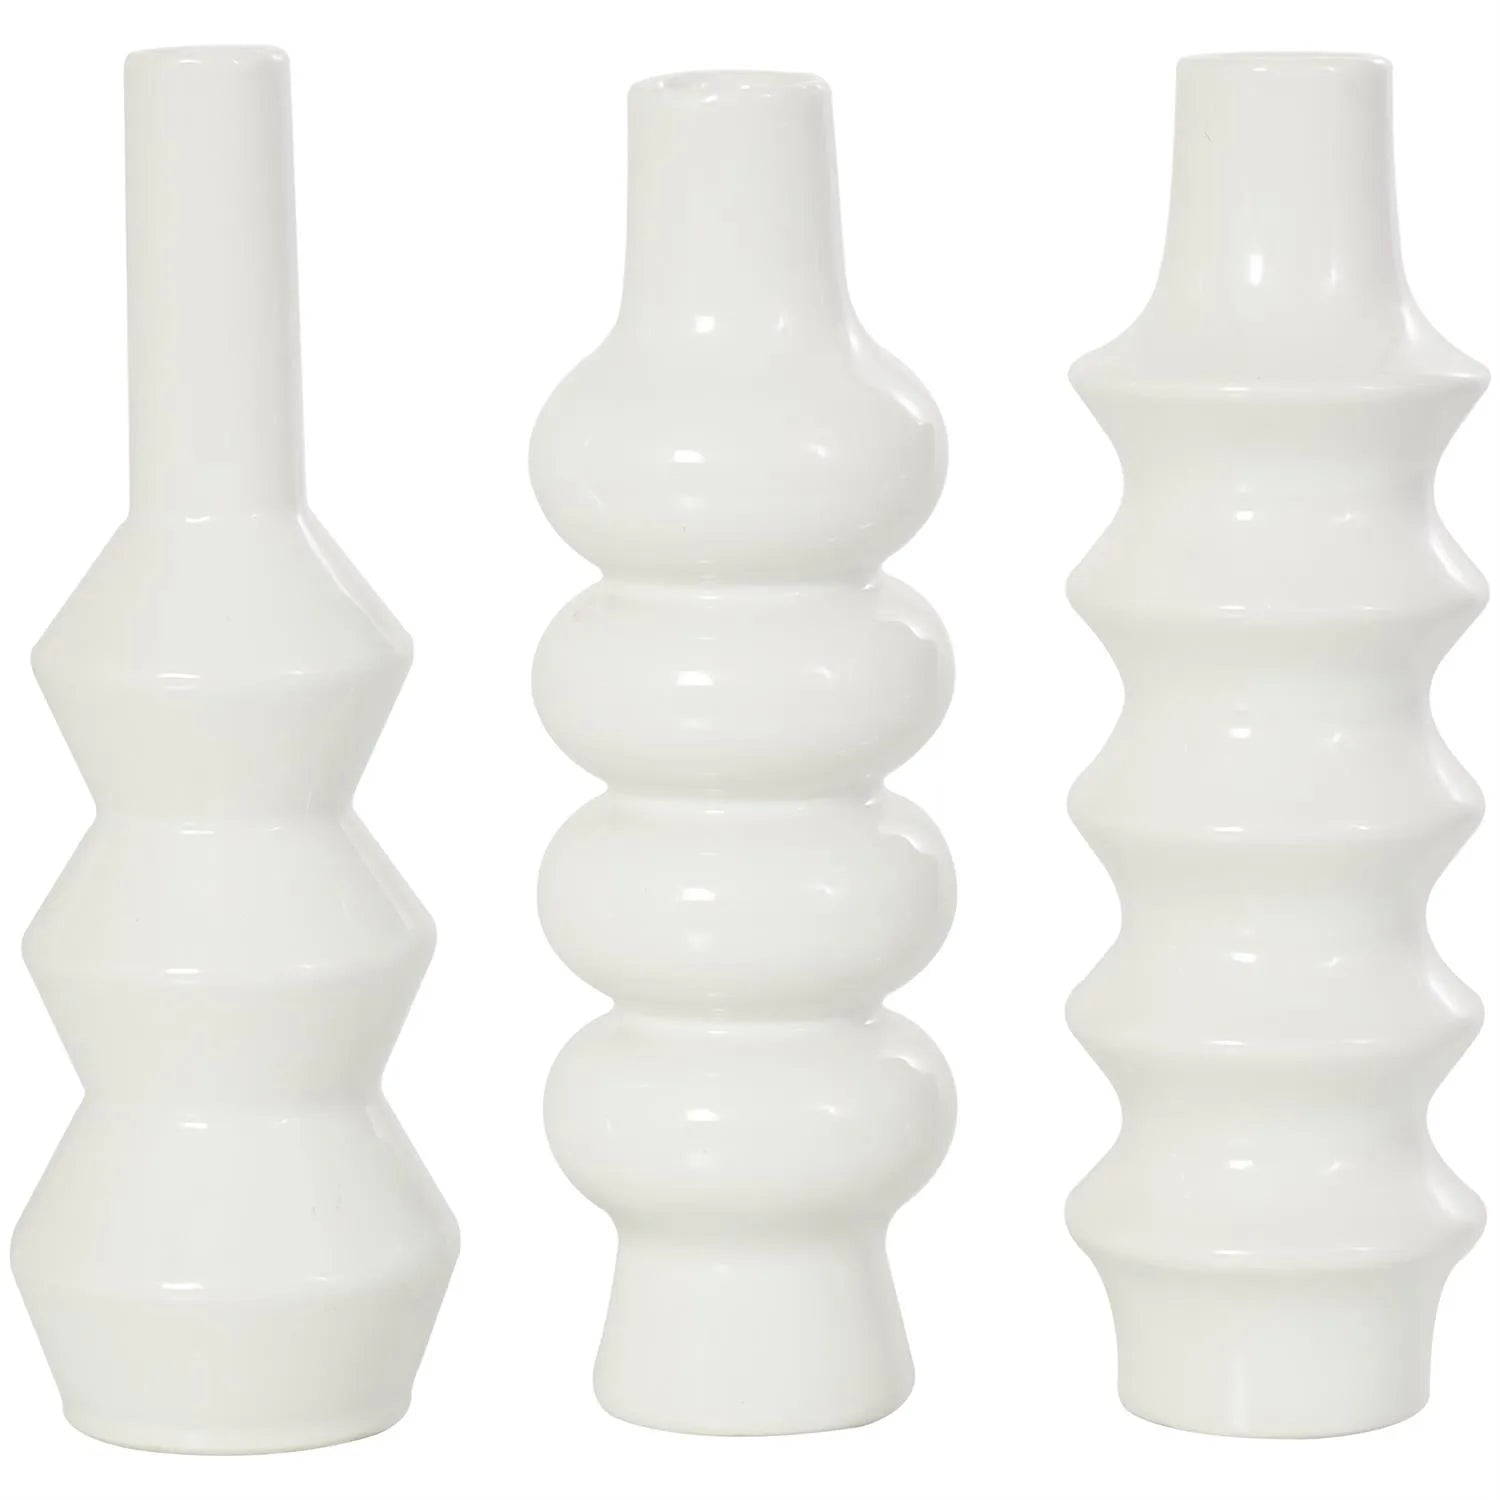 Abstract Bubble White Ceramic Vases Set of 3